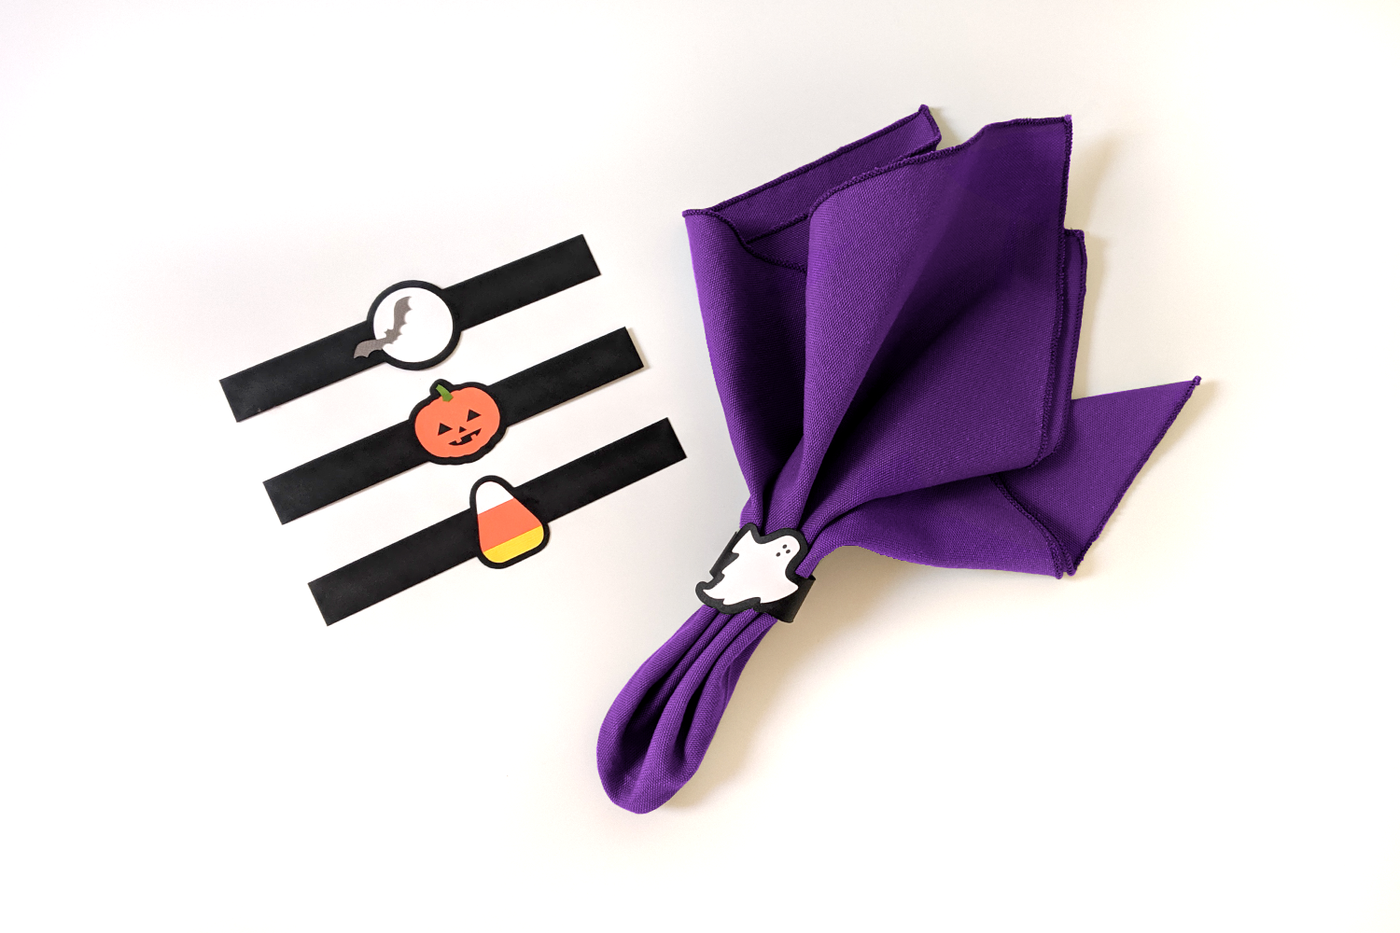 Purple napkin with a paper ghost napkin ring. Laying flat nearby are 3 more paper napkin rings: a bat in front of a full moon, a carved pumpkin, and a candy corn.